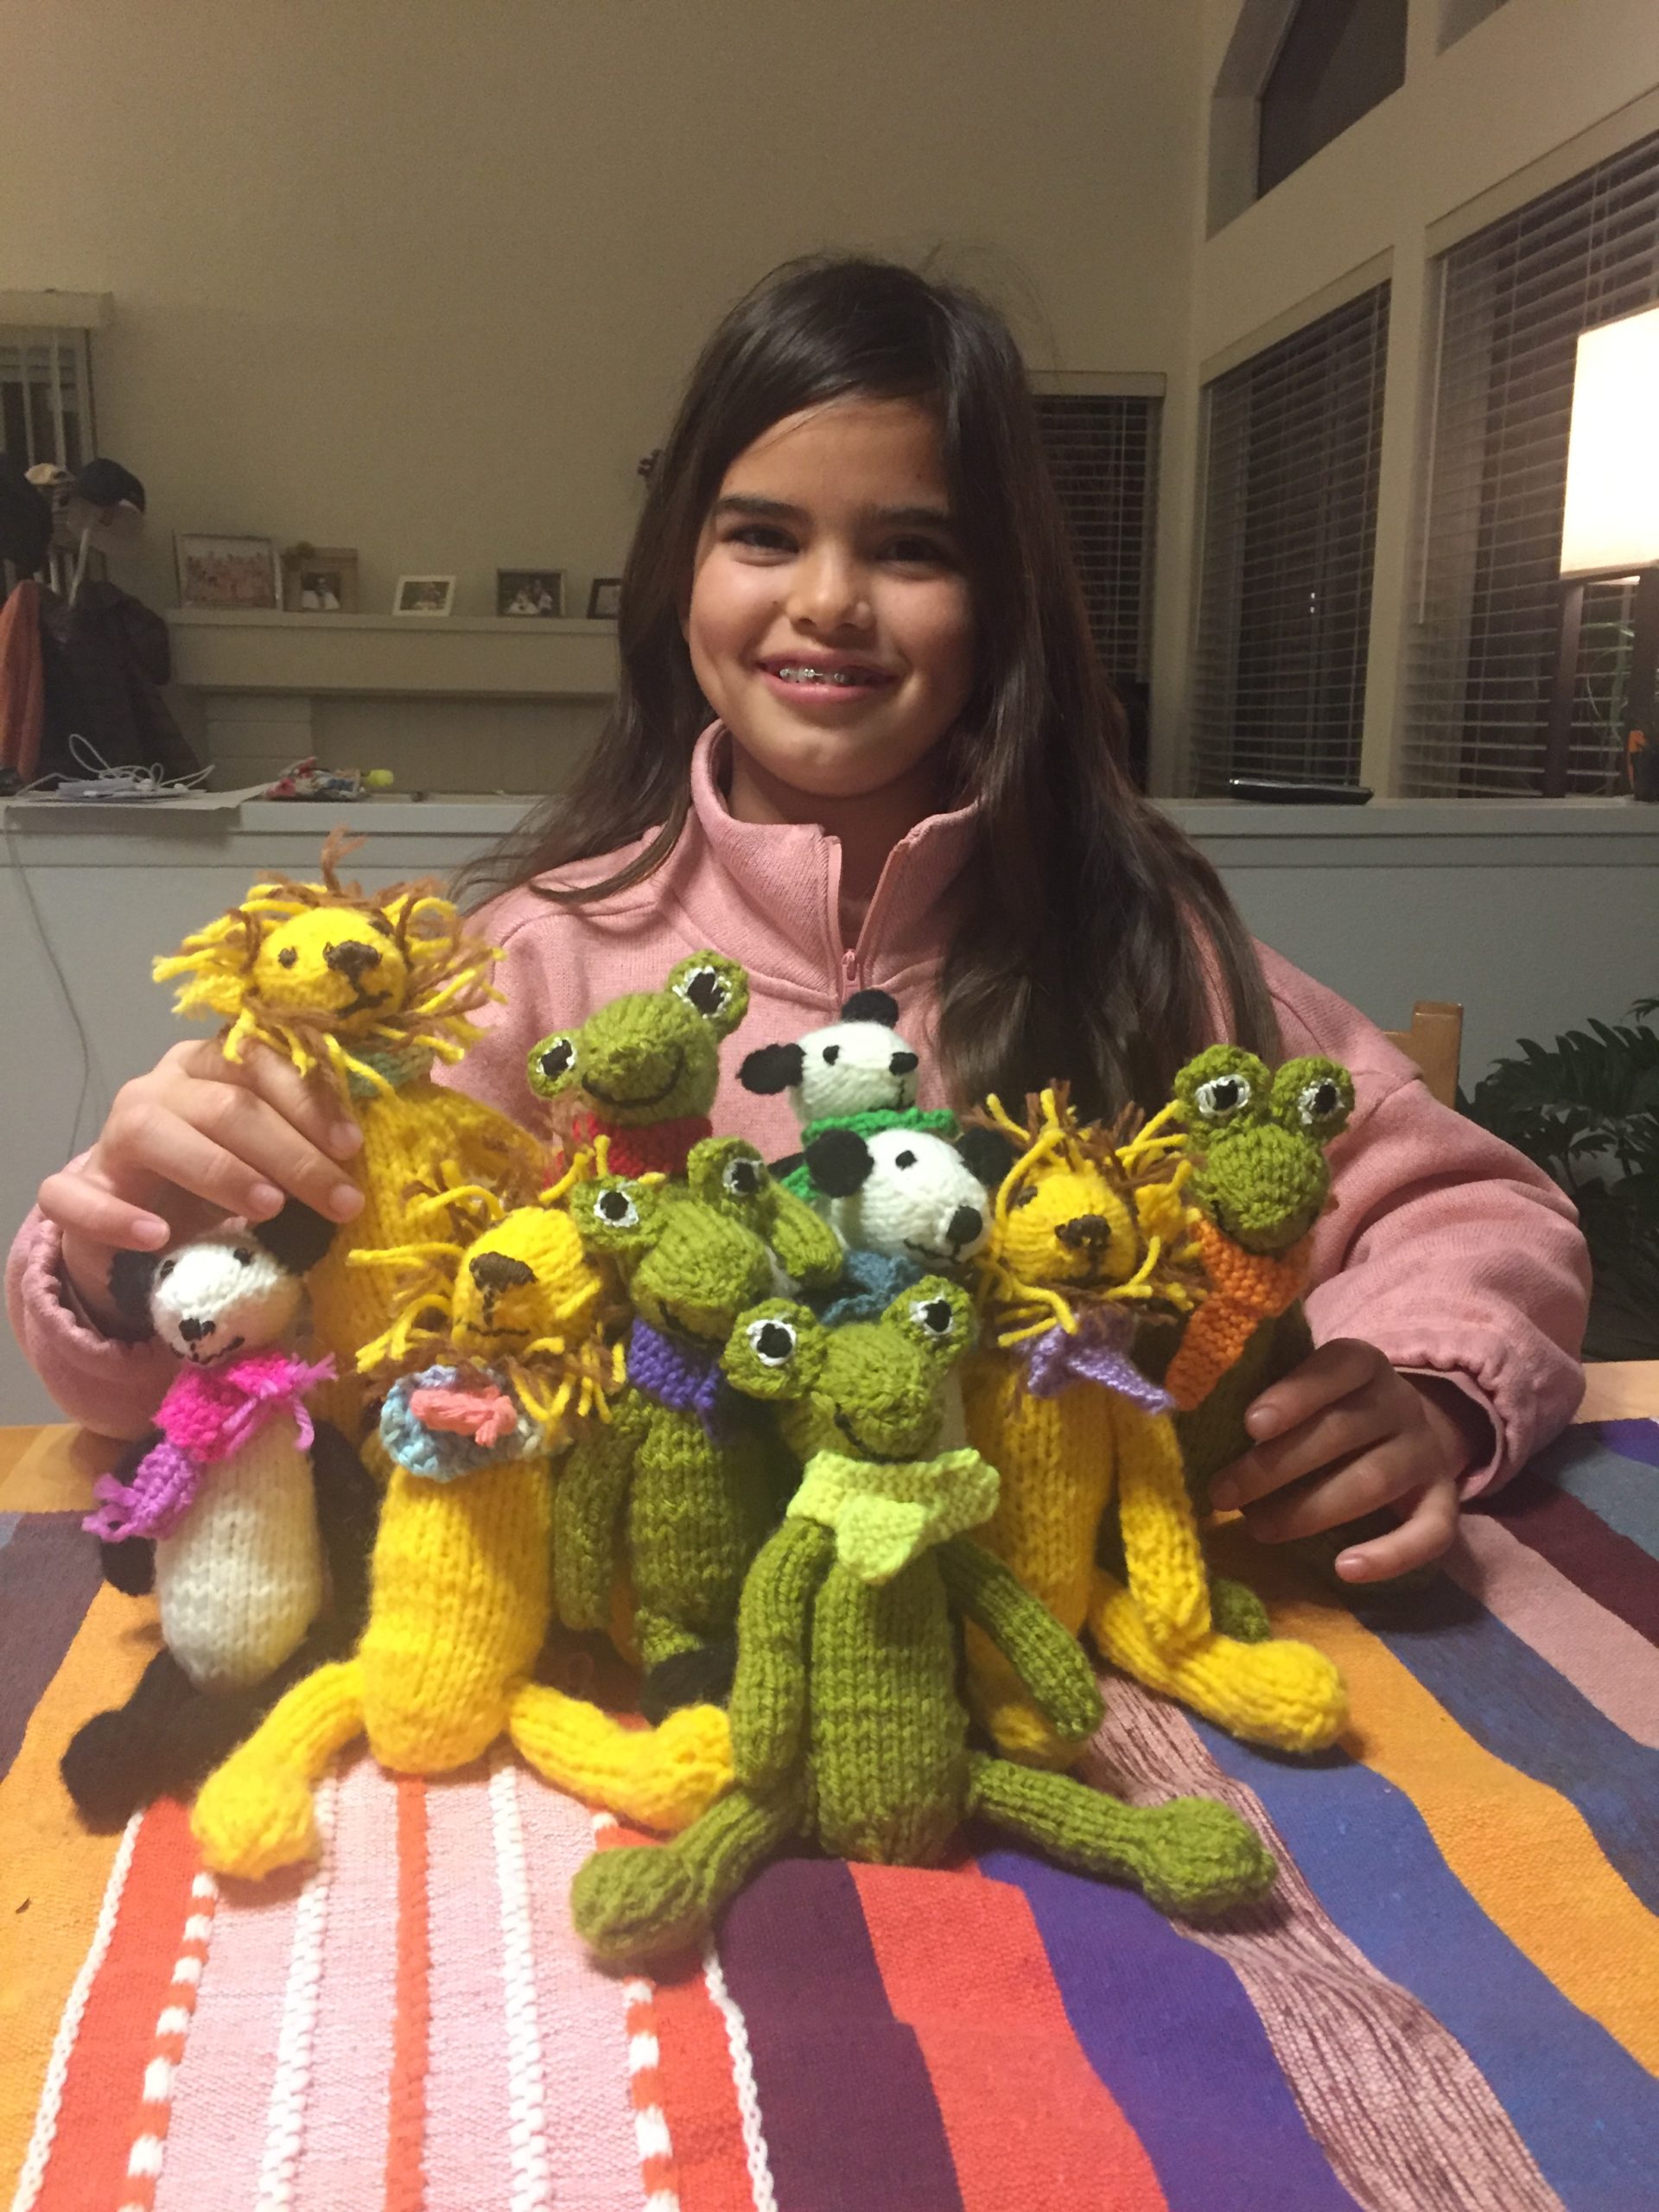 Juliana knitted stuffed animals for the orphans